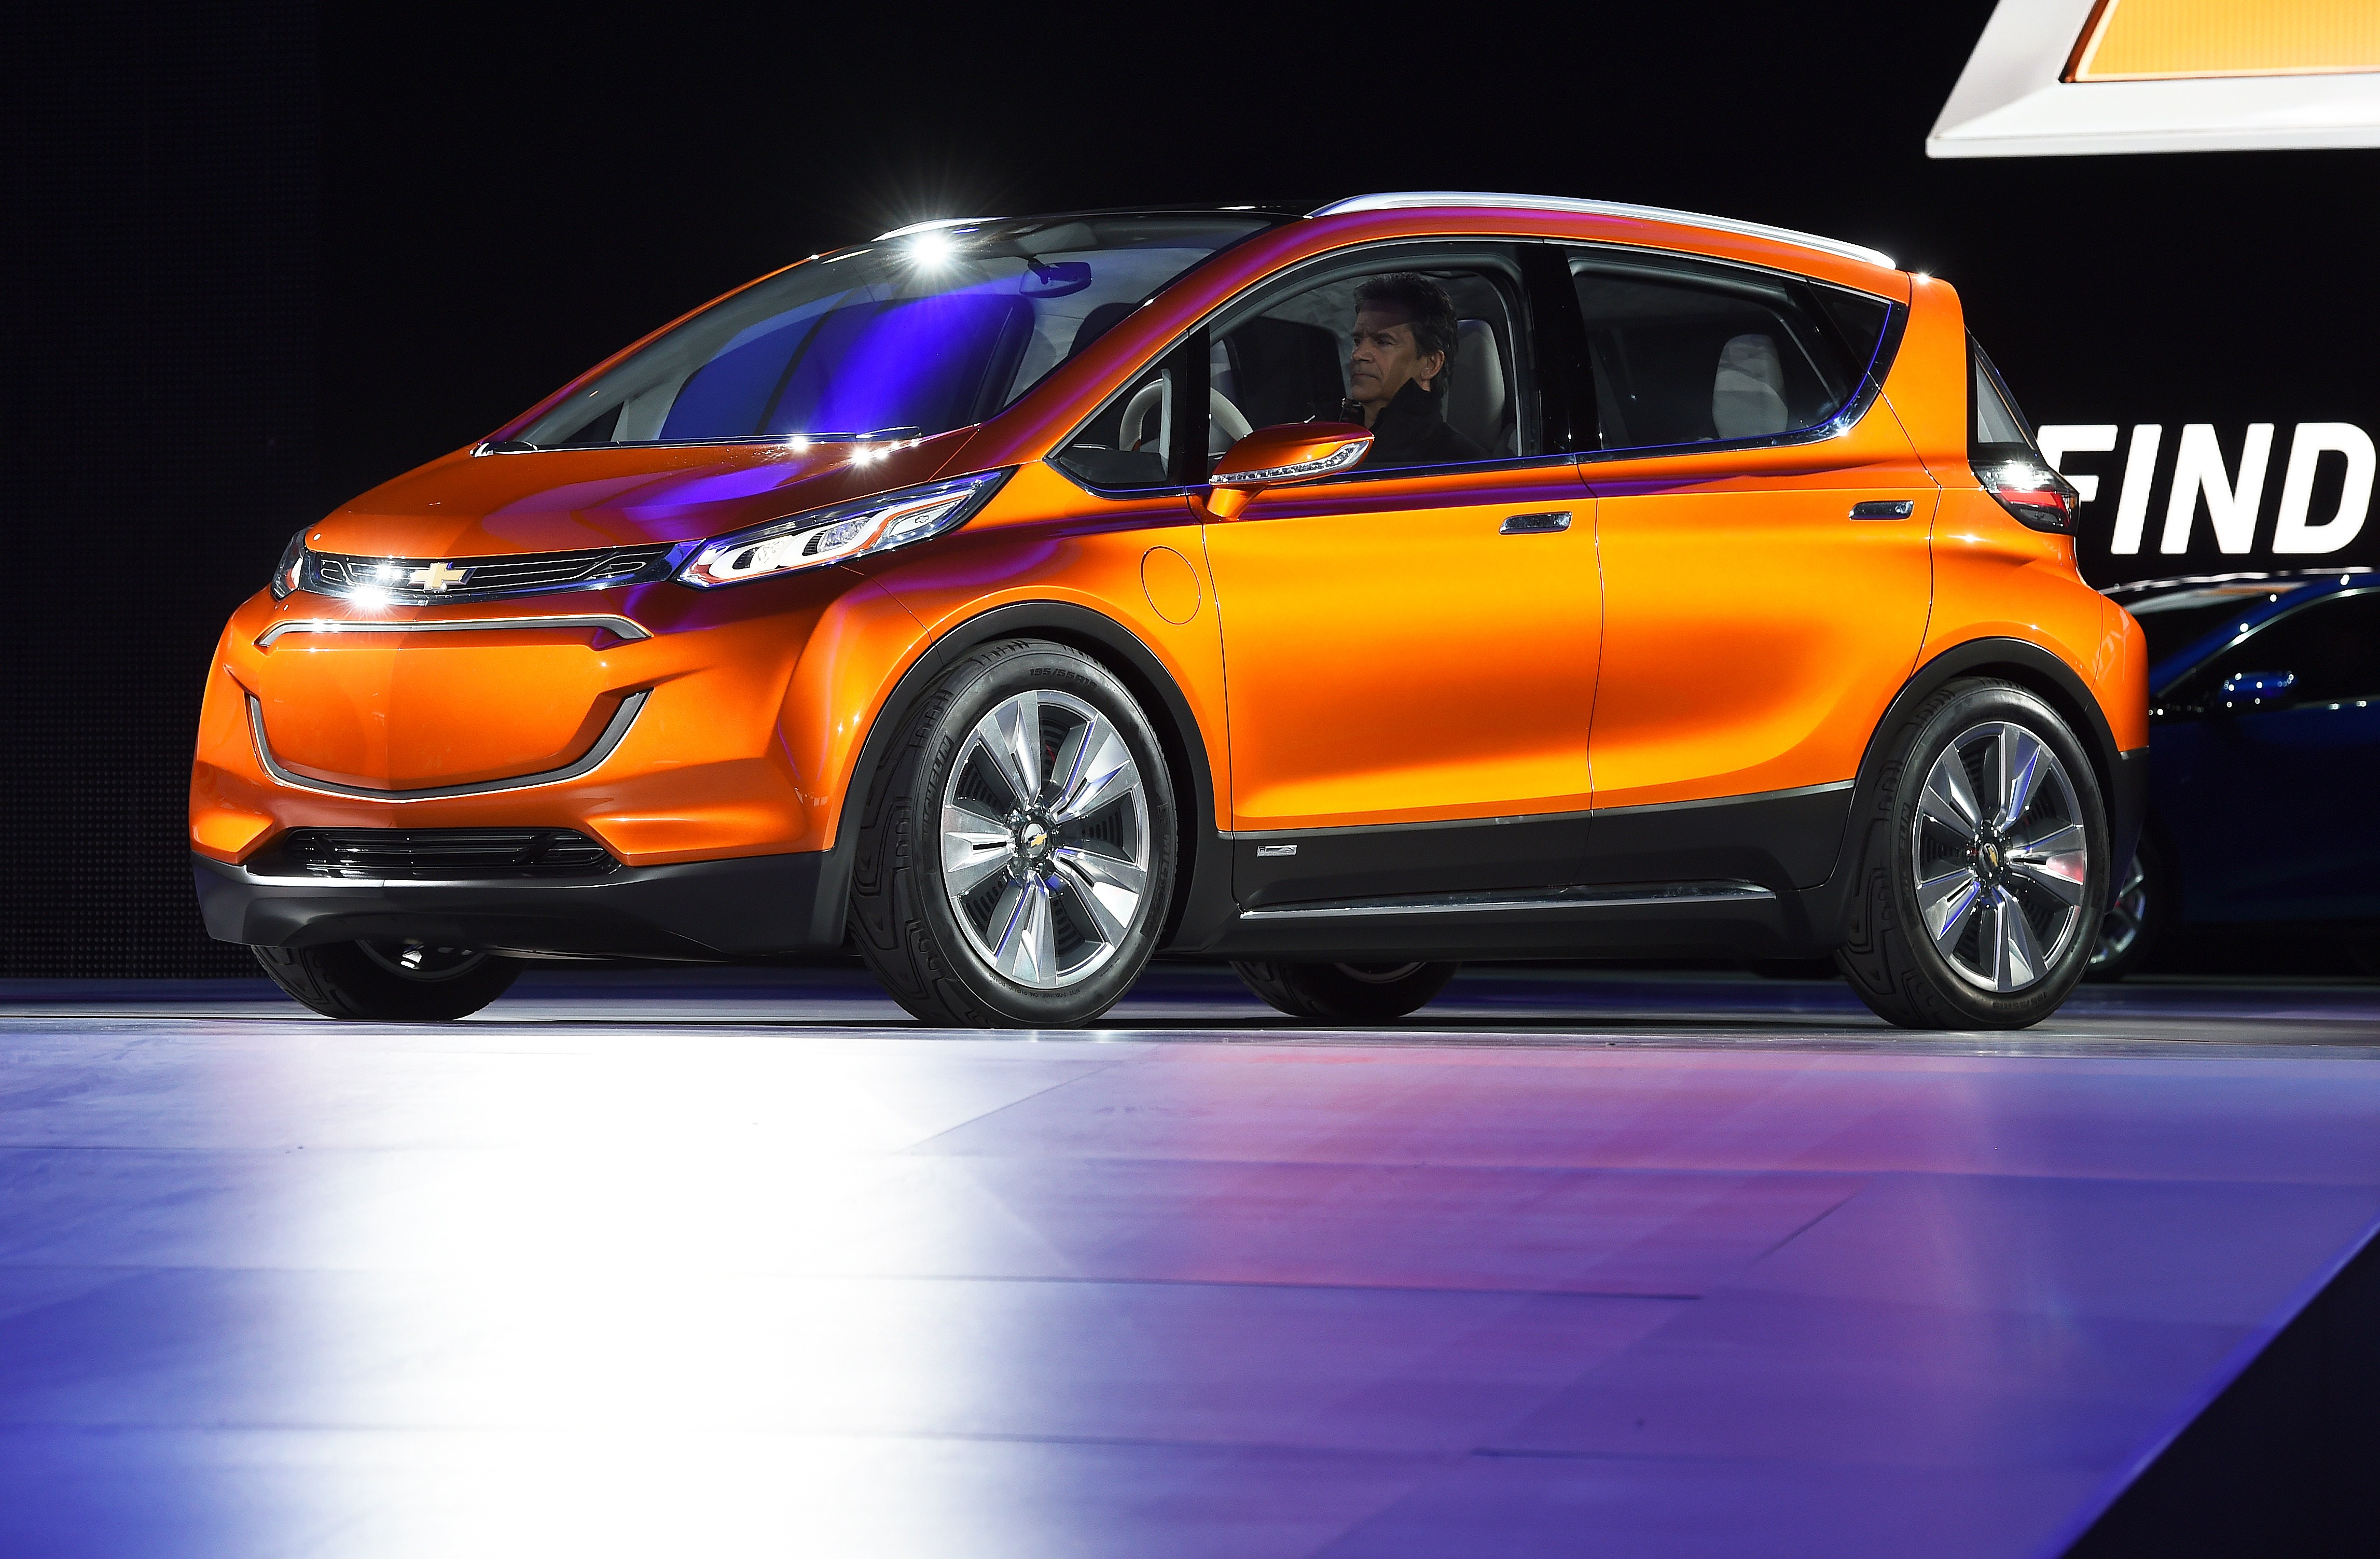 Chevrolet reveals their electric concept car Bolt EV to the media at The North American International Auto Show in Detroit, Michigan, on January 12, 2015. (Jewel Samad&mdash;AFP/Getty Images)